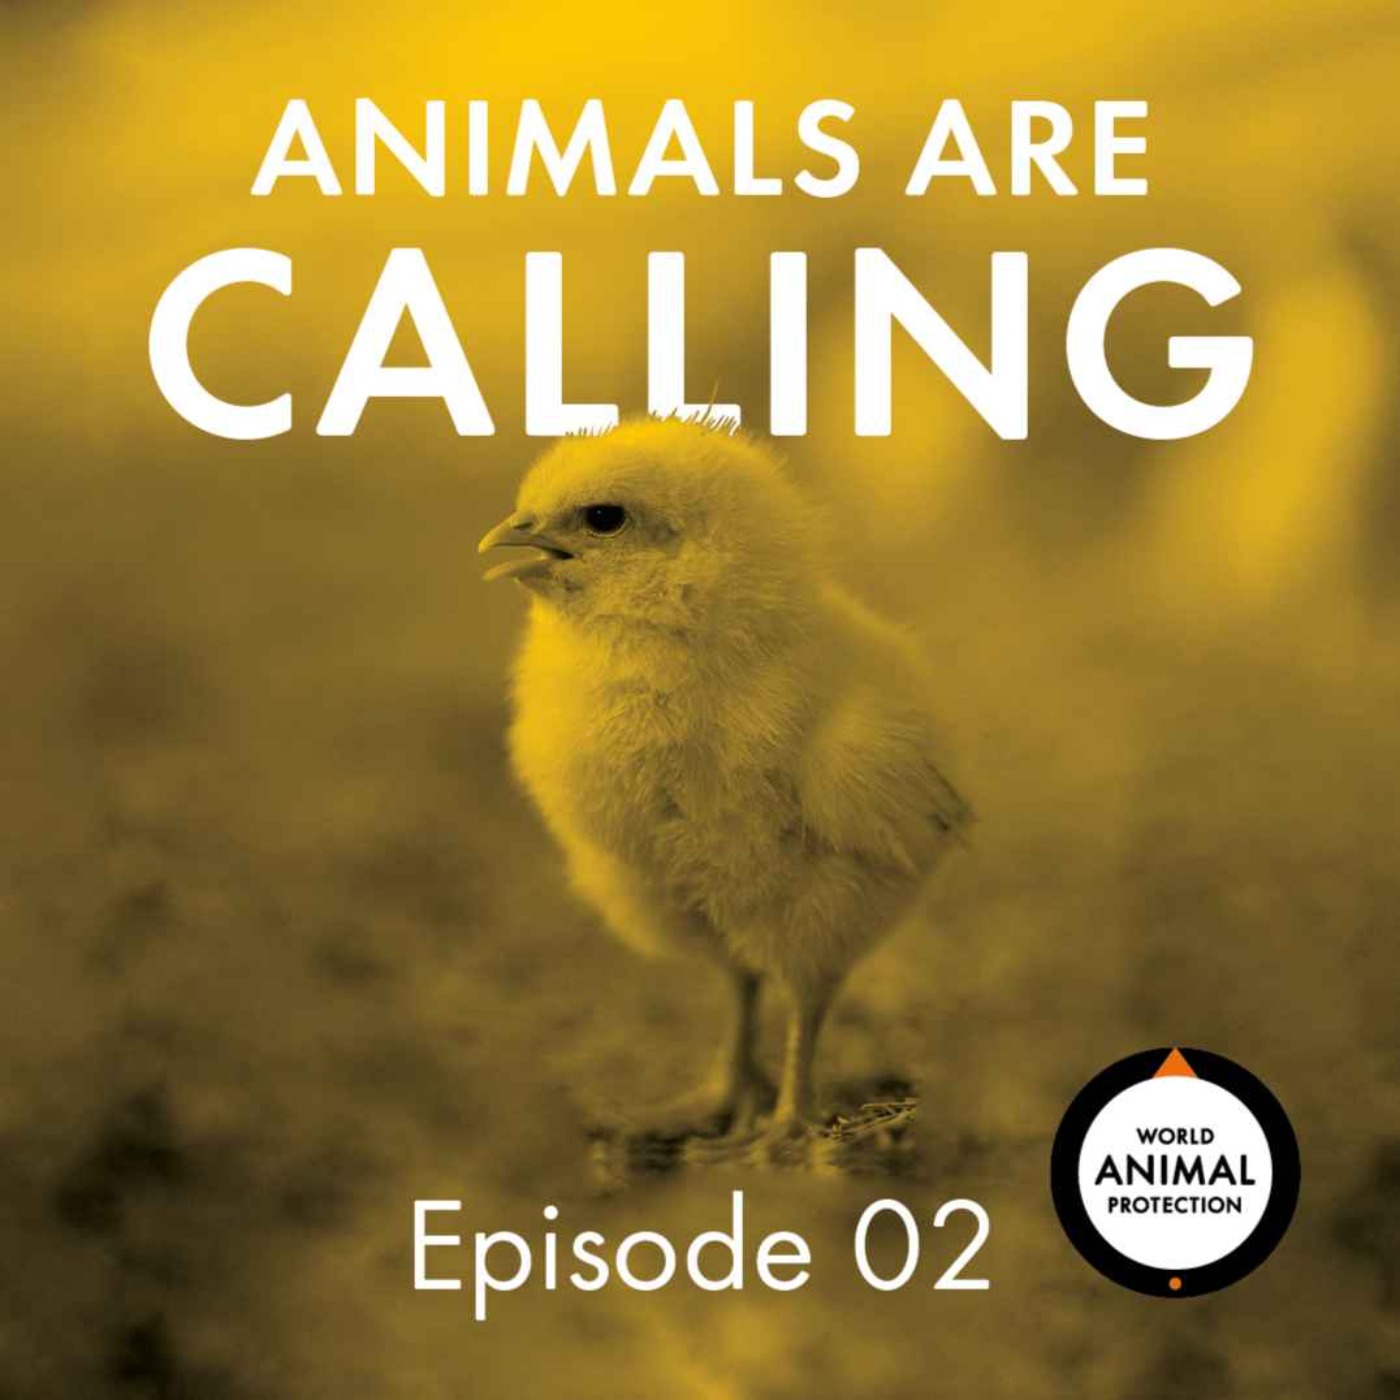 S1 E2: There Is No Future For Factory Farming with Mark Dia